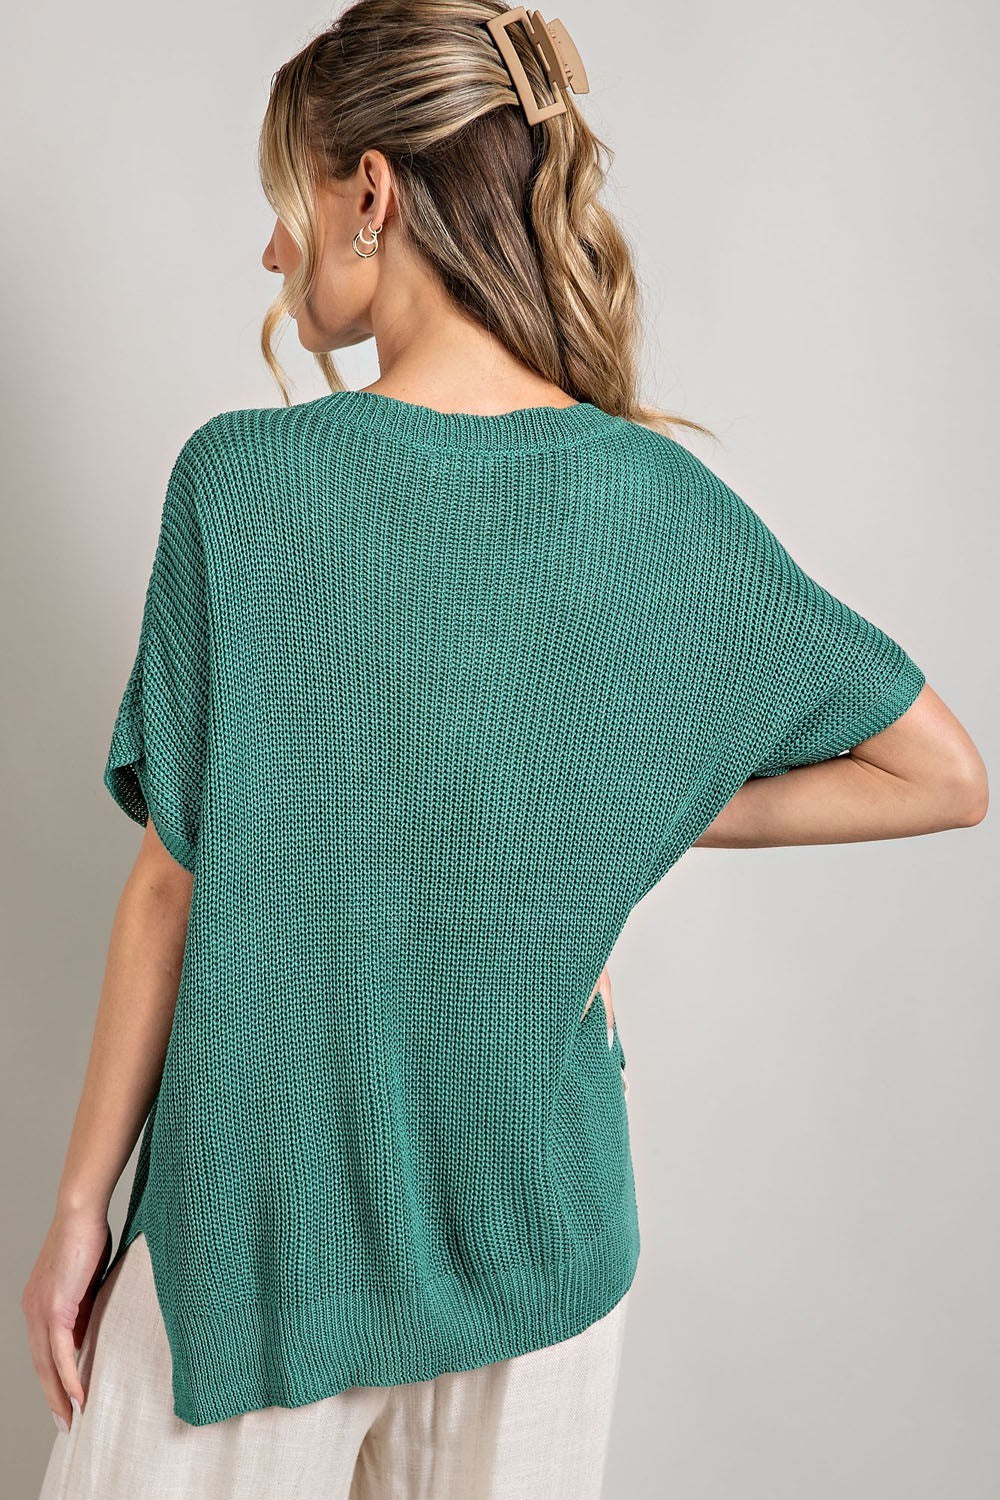 Liverpool Los Angeles Knit Camisole Top - Jonah & Sage